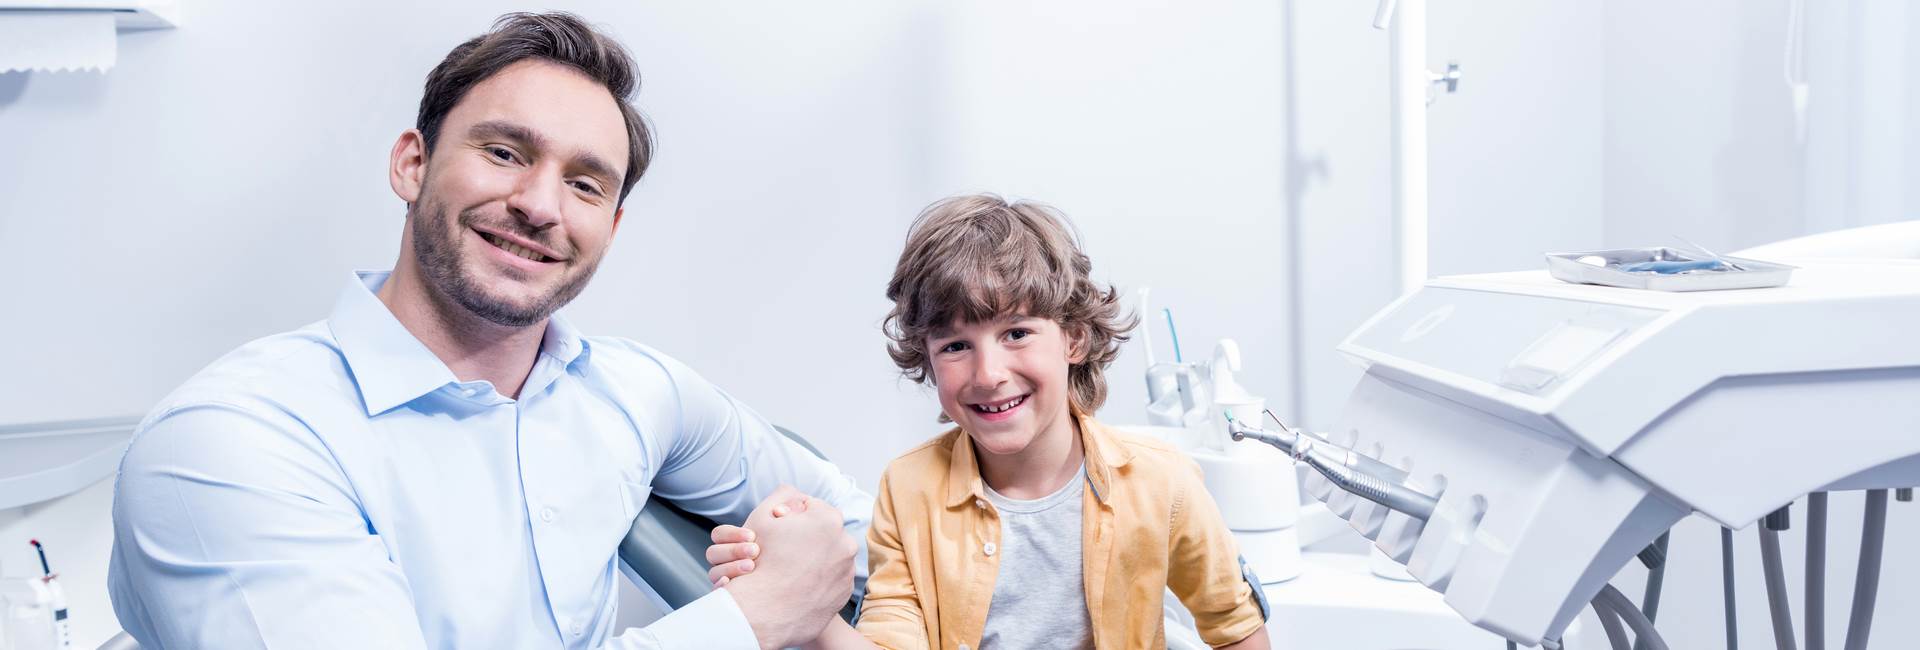 Kid and dentist smiling